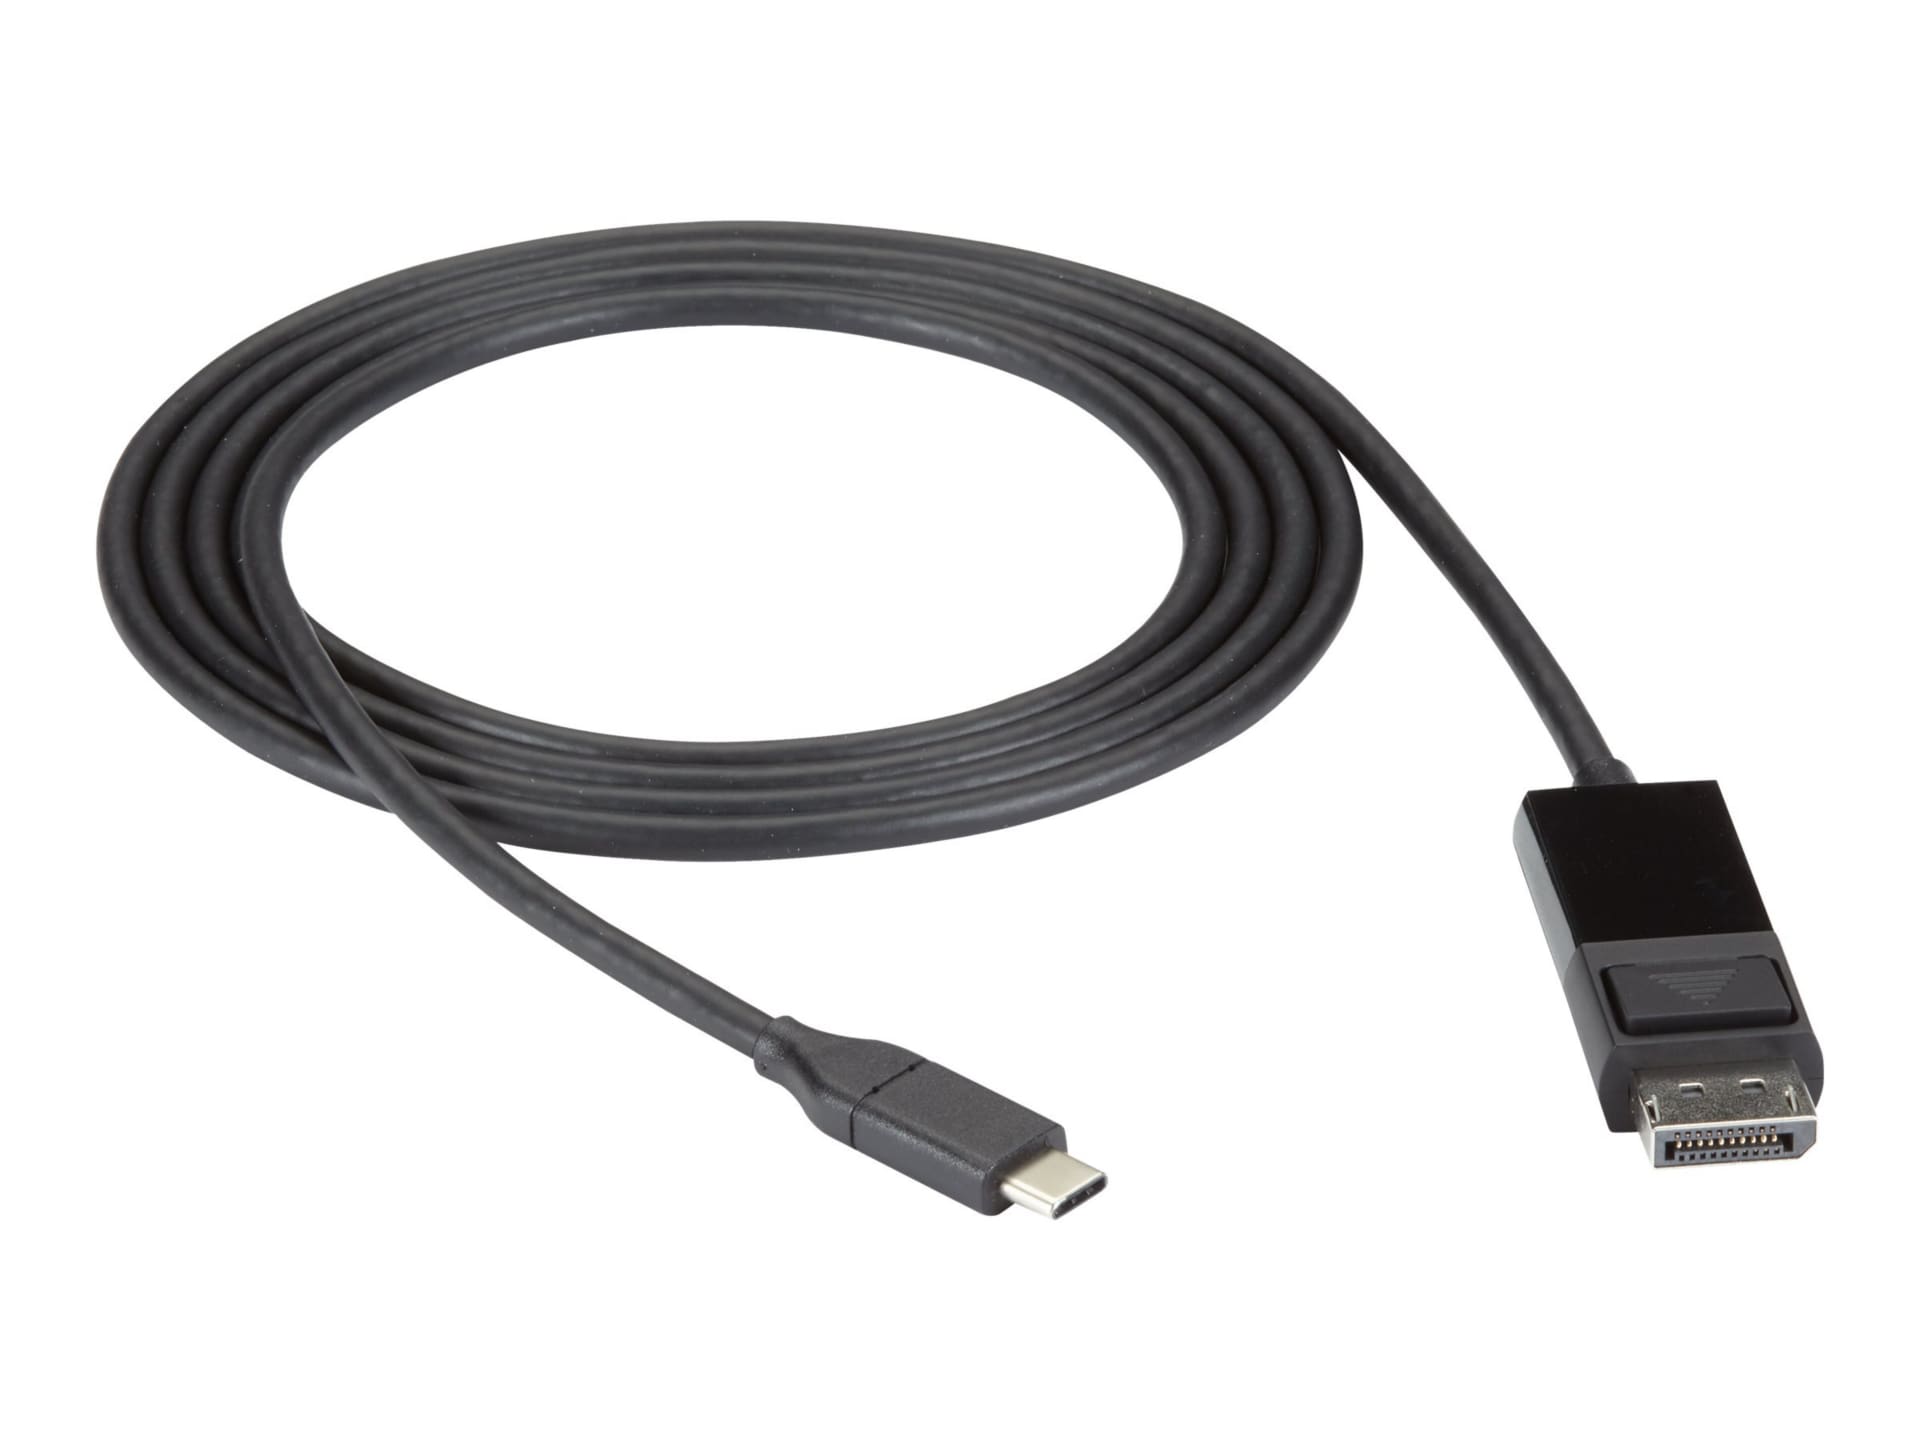 Black Box - video adapter cable - 24 pin USB-C to DisplayPort - 6 ft